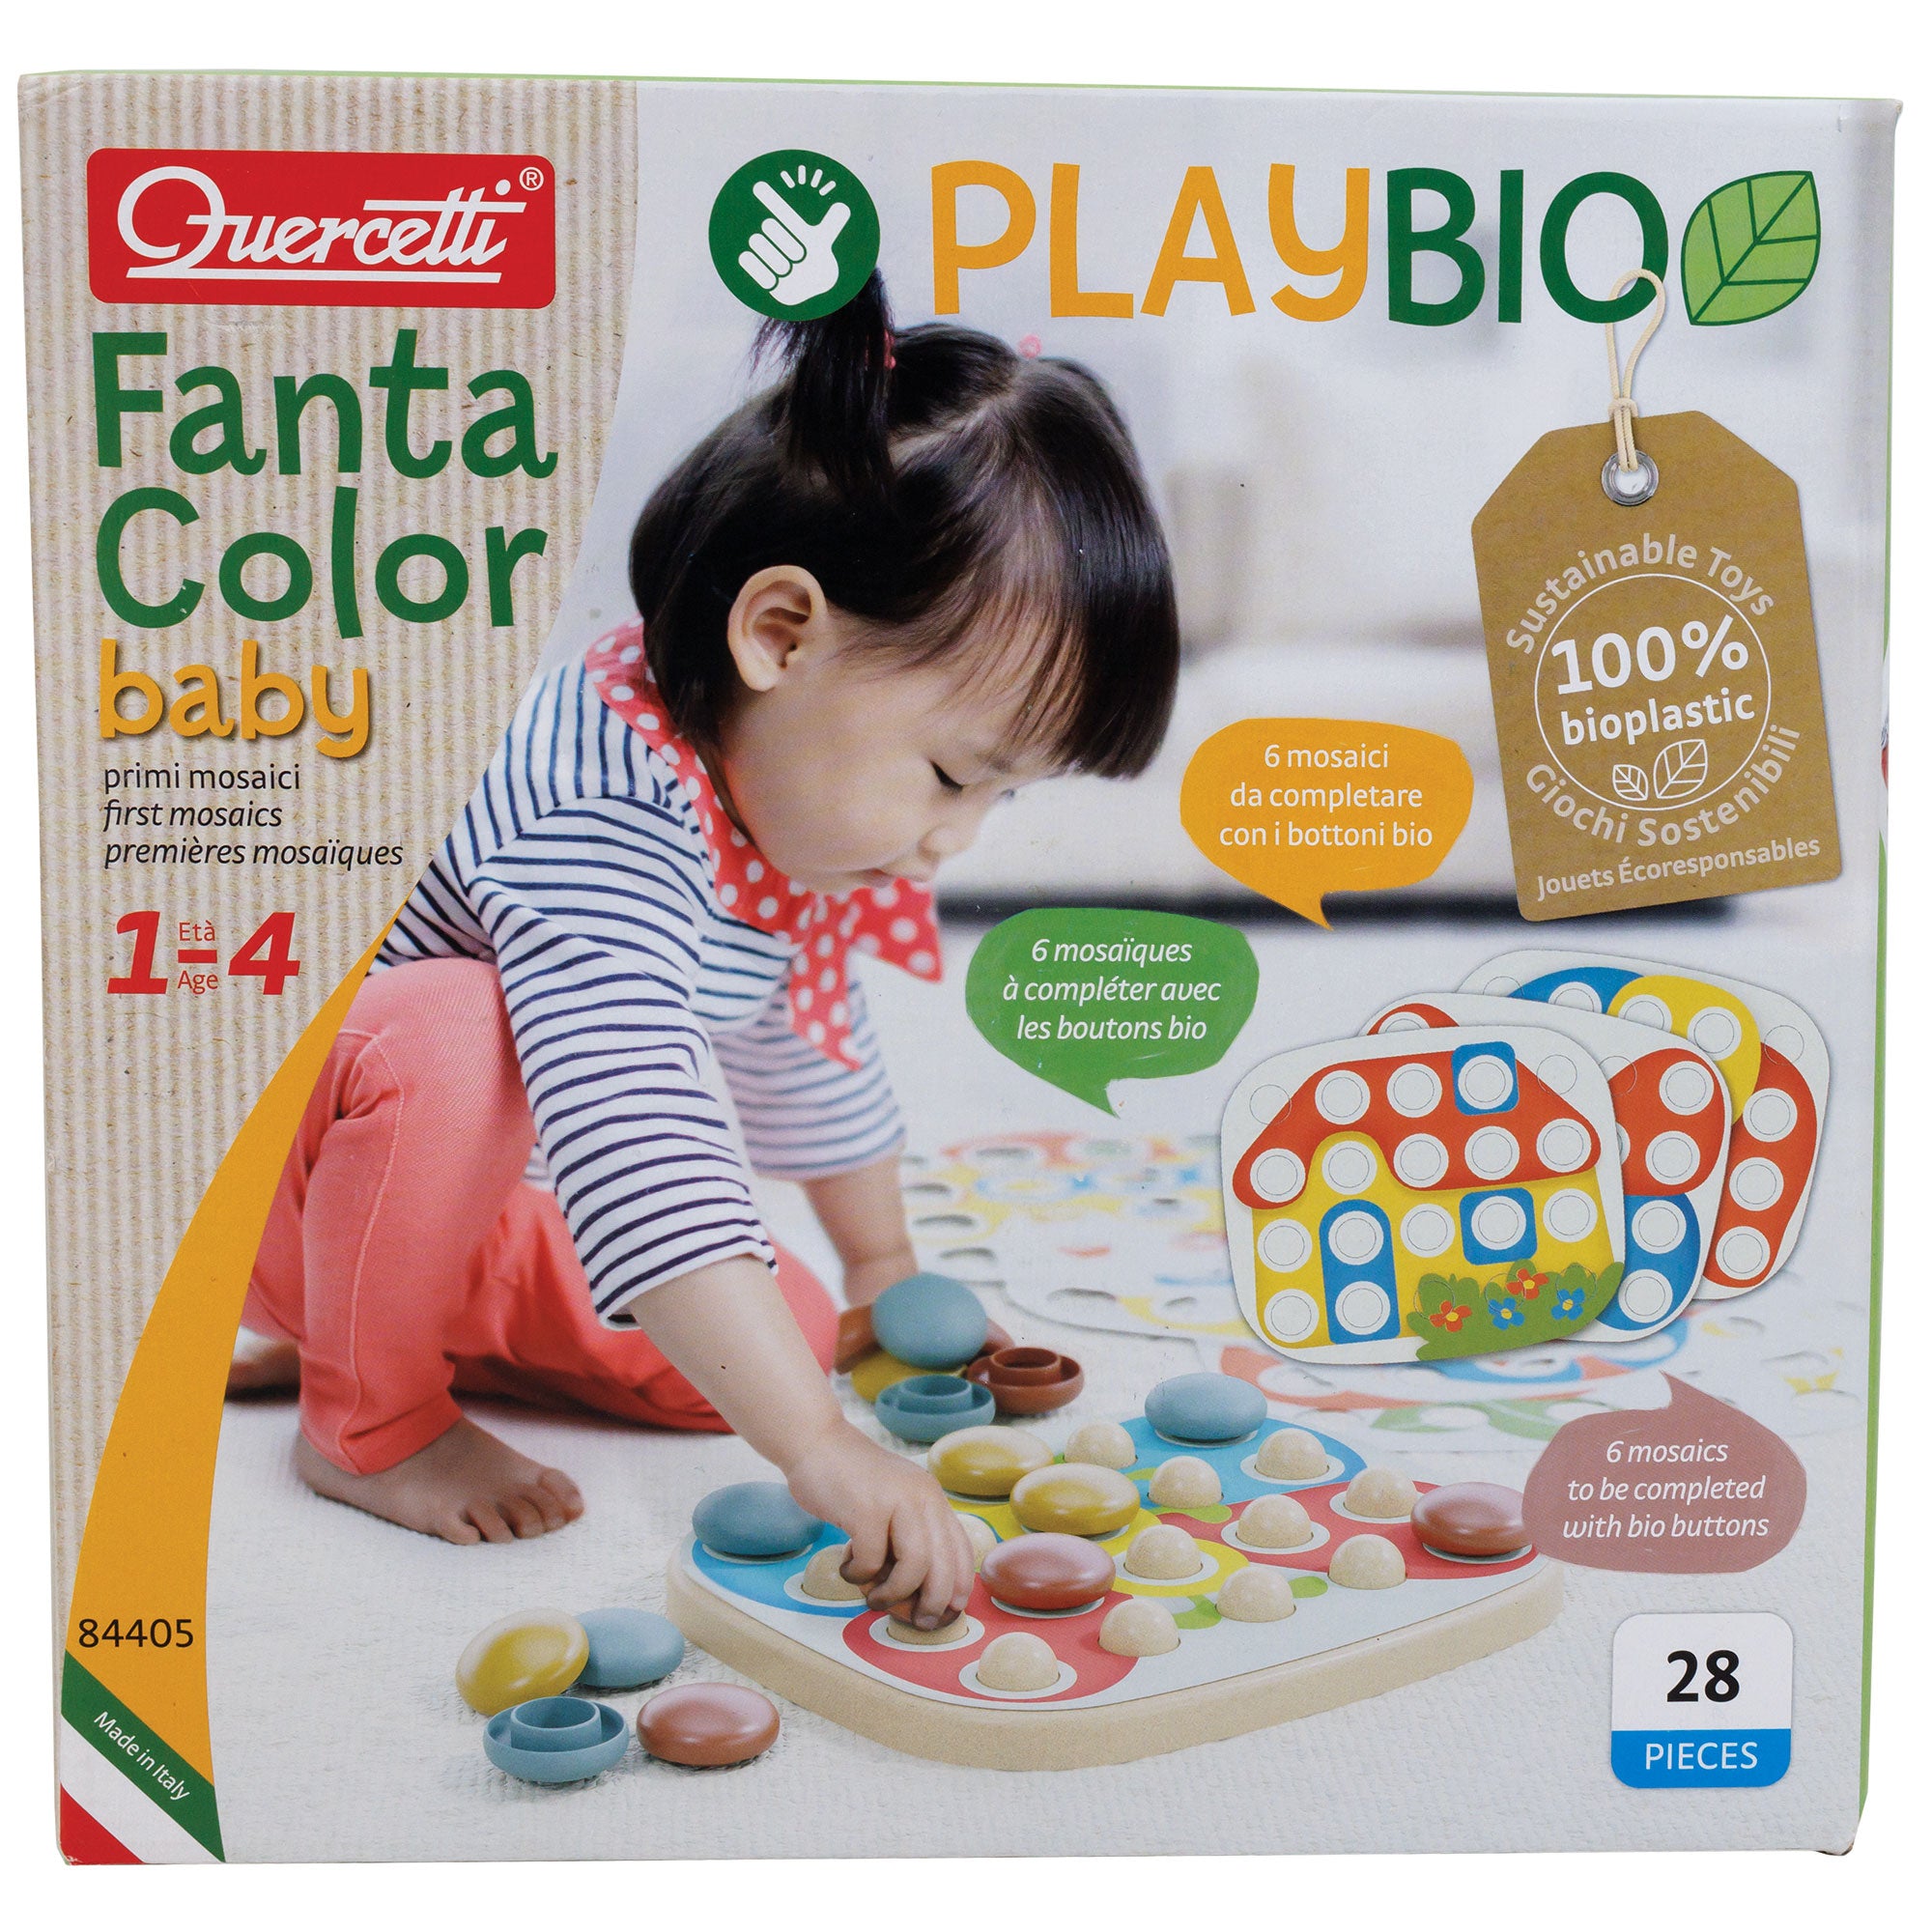 Quercetti Fanta Color Baby product box. In the middle of the box is a black-haired toddler girl playing with the butterfly puzzle. She is putting a red round piece onto the pegboard on the floor. Scattered around her are the round peg cover pieces and picture cards. On top of the picture are 2 picture boards and text with the title and a note that the item is 100 percent bio plastic.